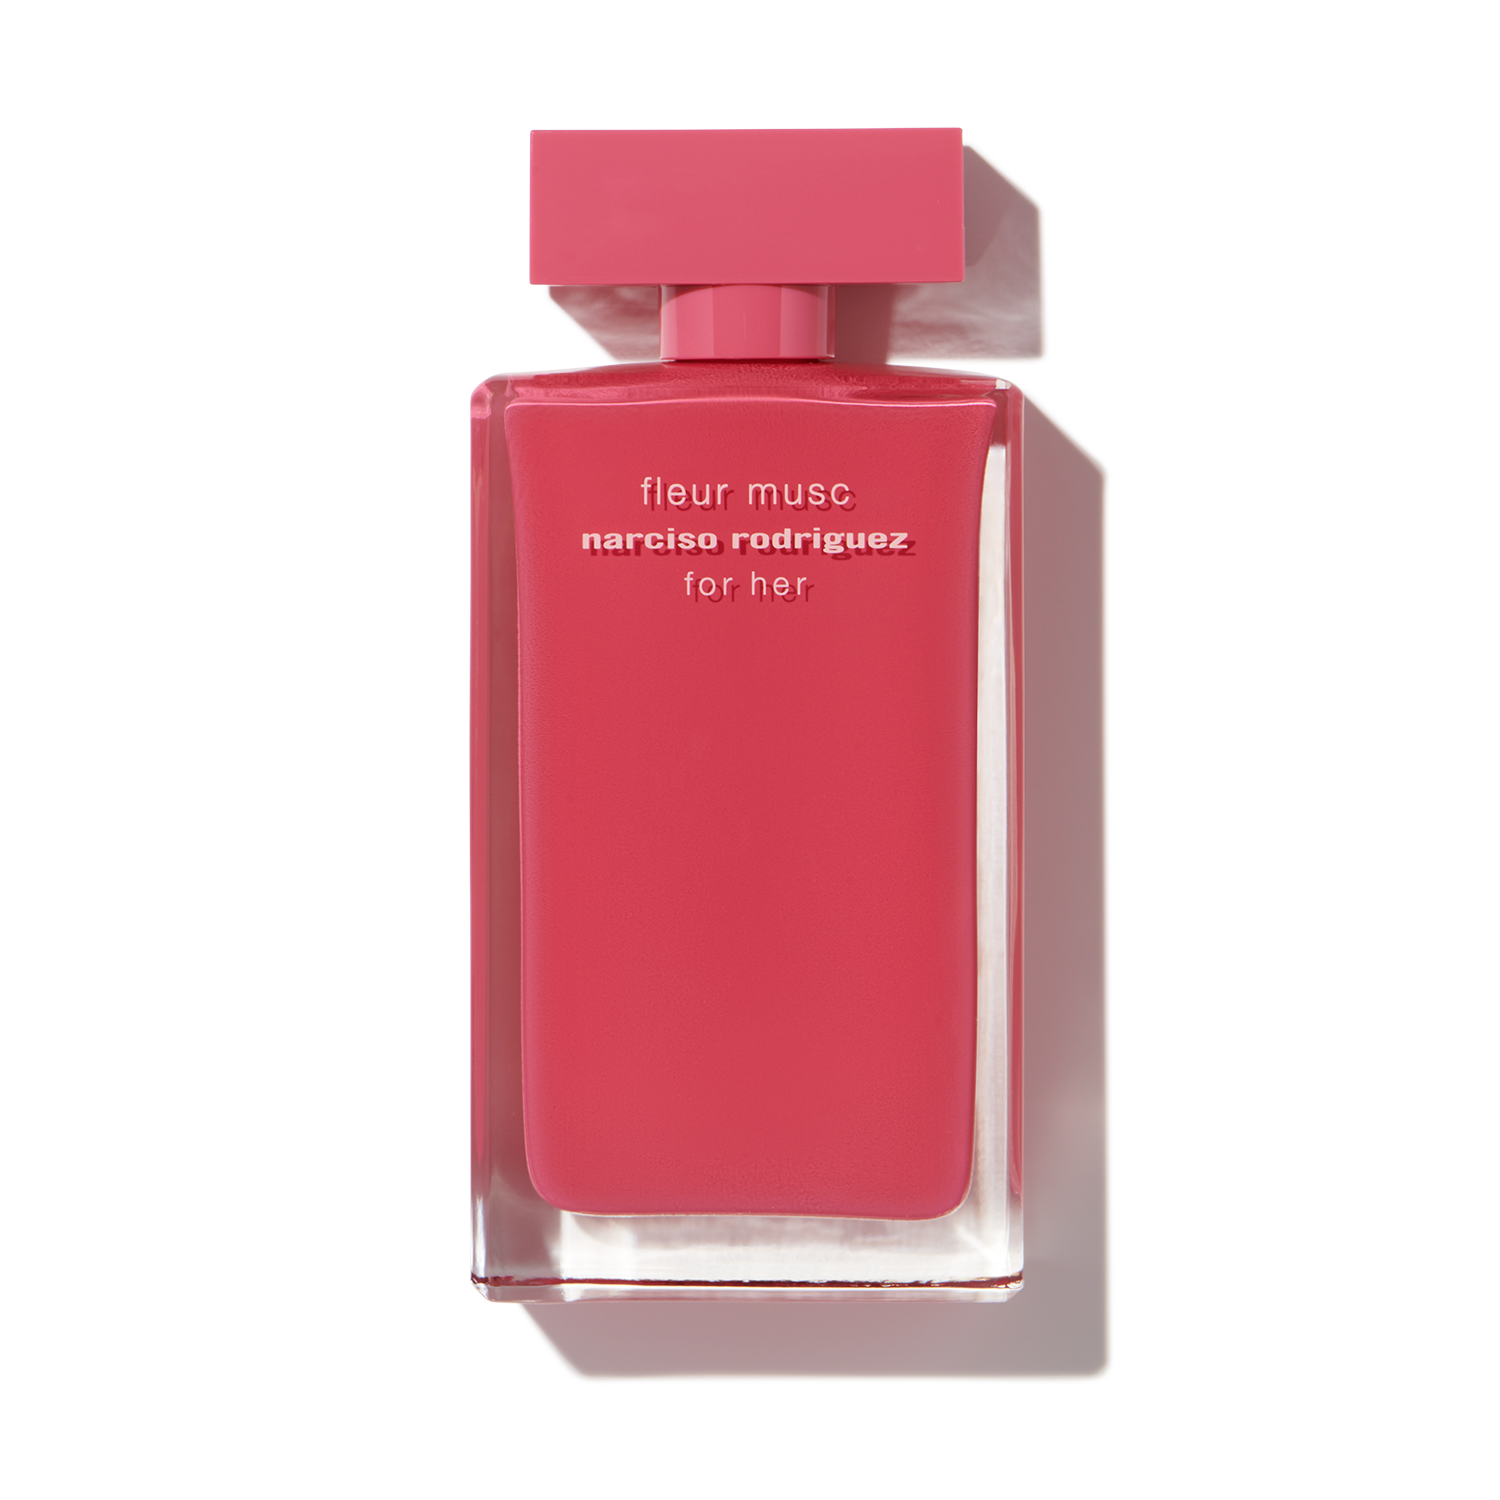 Narciso Rodriguez fleur Musc 100 мл. Fleur Musc Narciso Rodriguez for her. Нарцисо Родригез Флер МУСК. Narciso Rodriguez for her. Родригес флер